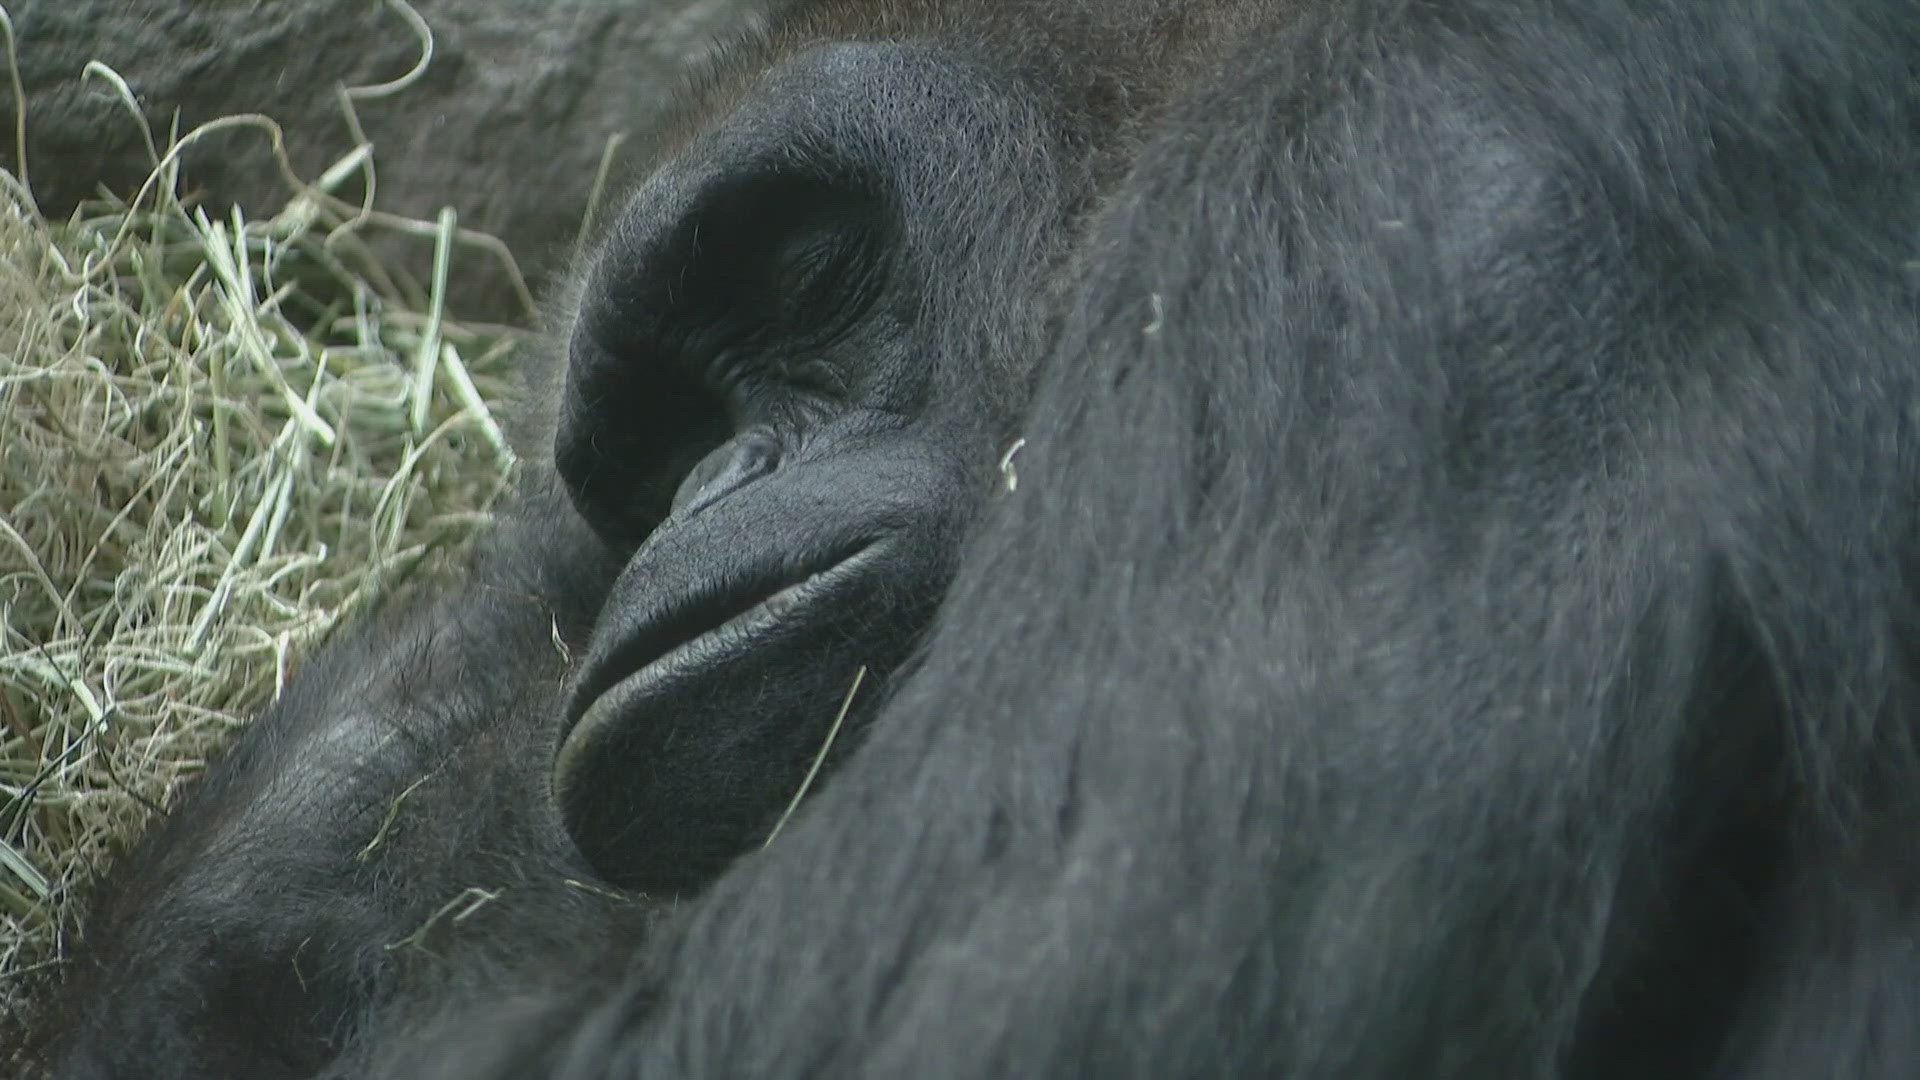 Akenji is getting ready to give birth to her first offspring at the end of June or early July.